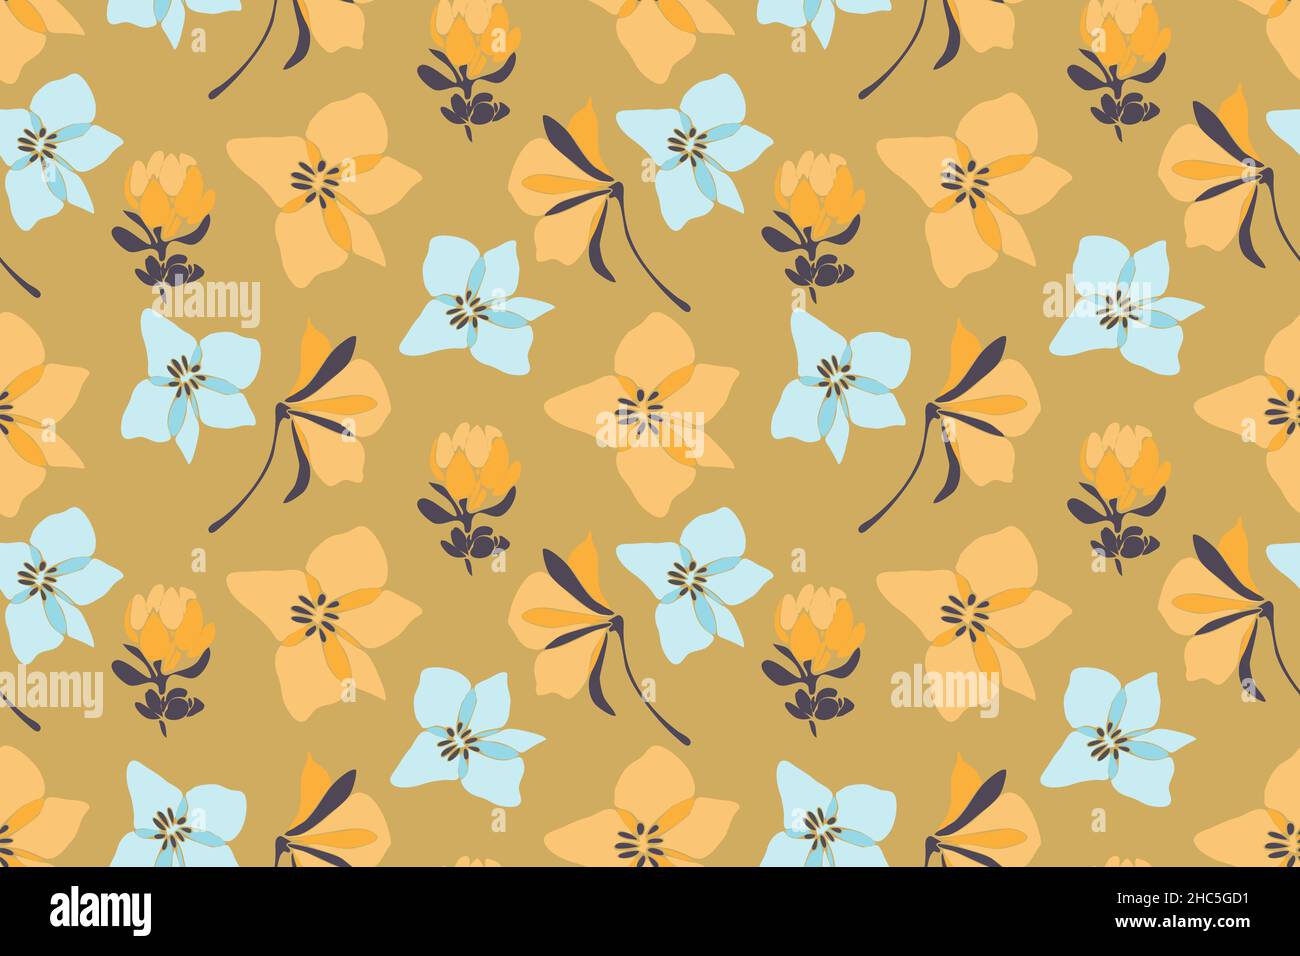 Vanilla vector seamless pattern with pale flowers. Stock Vector